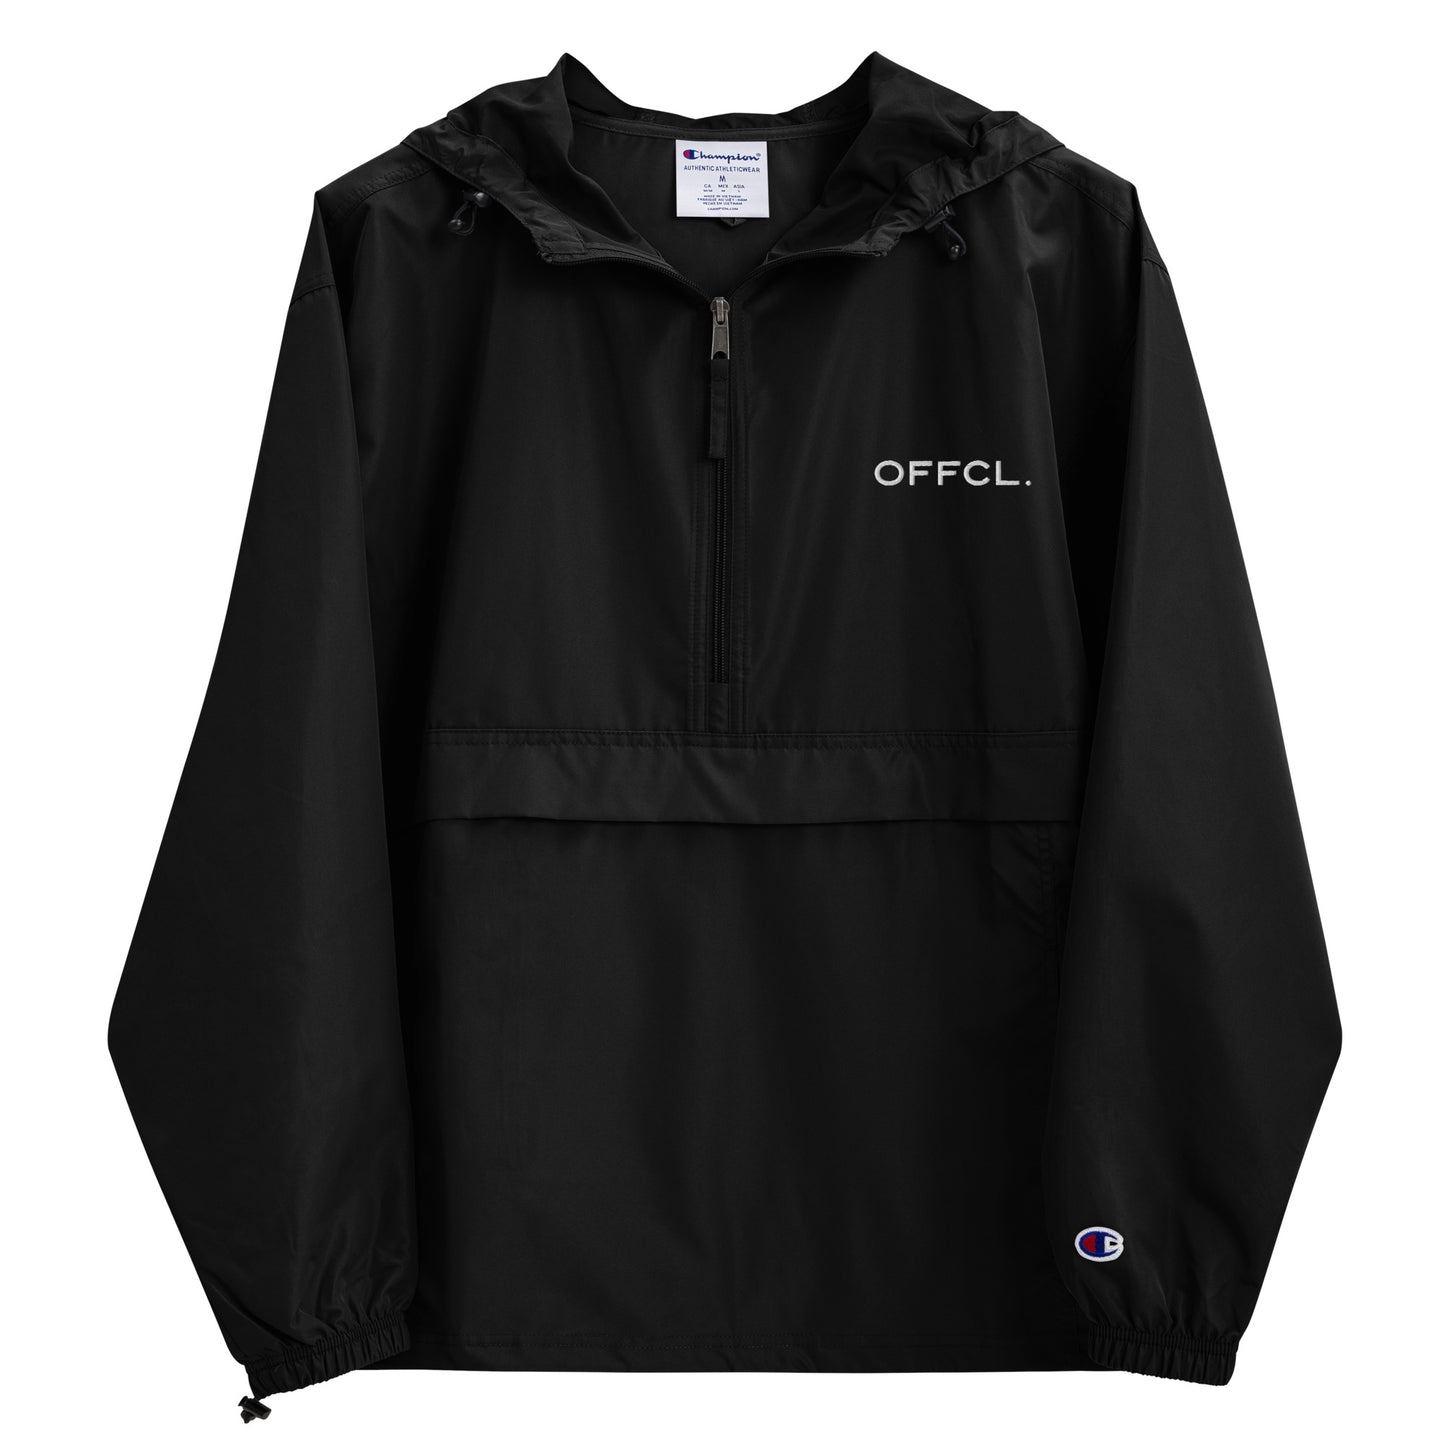 OFFCL. Pack Jacket